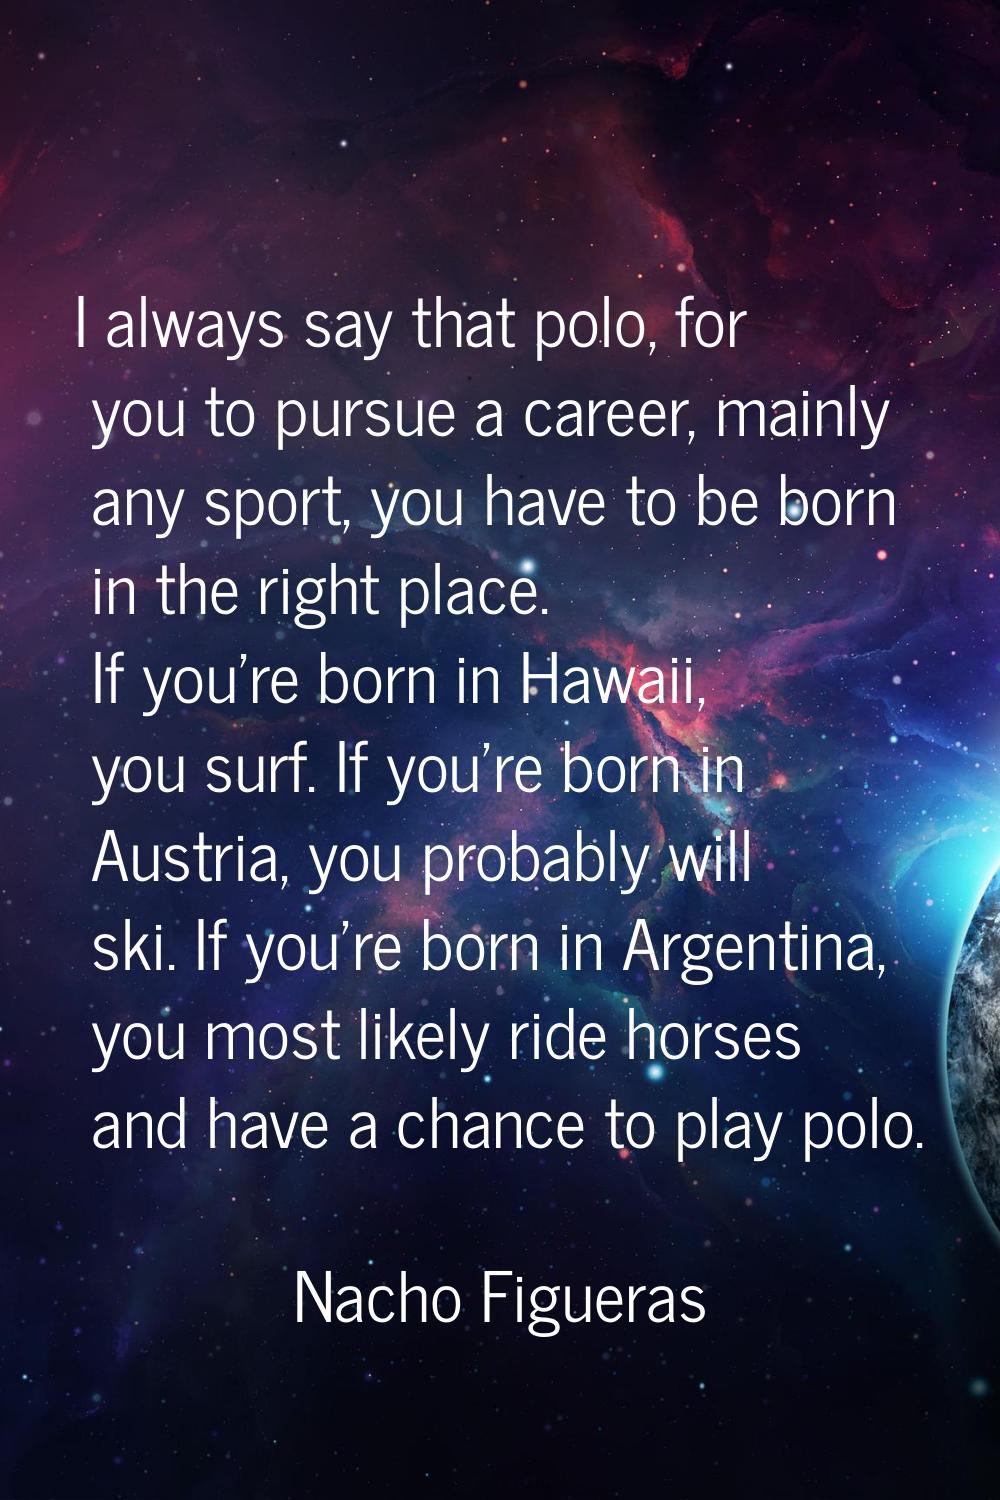 I always say that polo, for you to pursue a career, mainly any sport, you have to be born in the ri